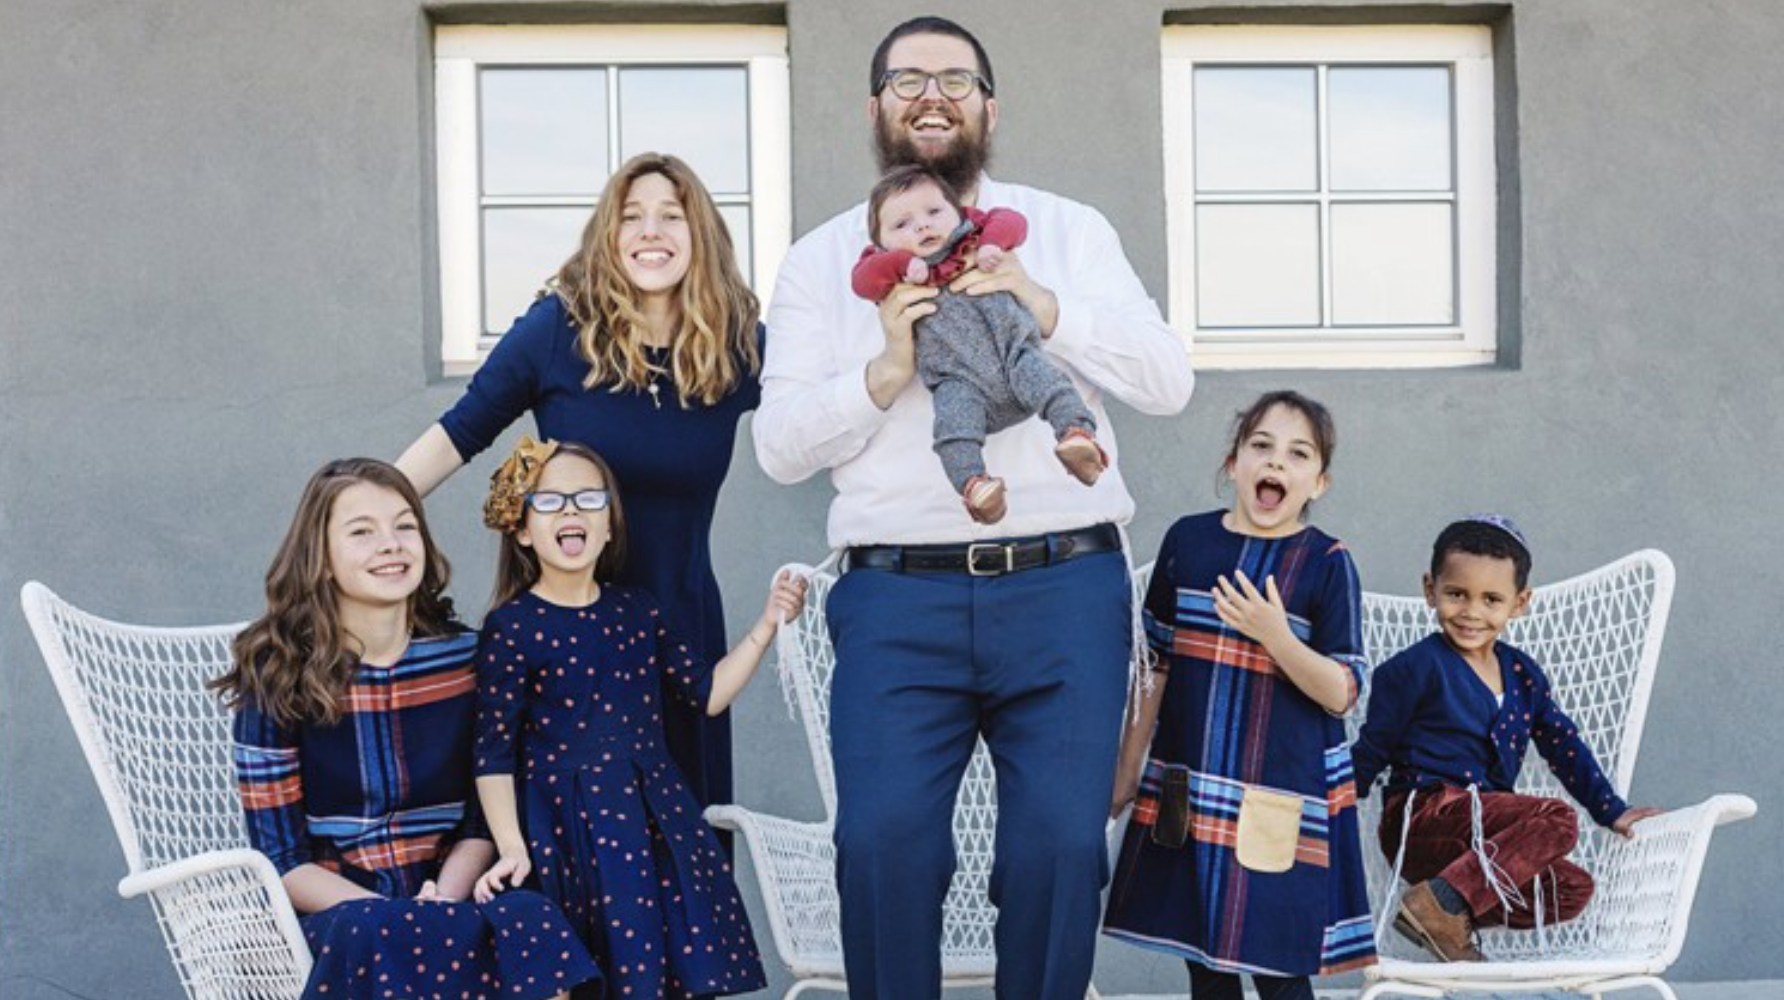 Rabbi Chaim, his wife Chavie and their five adopted children